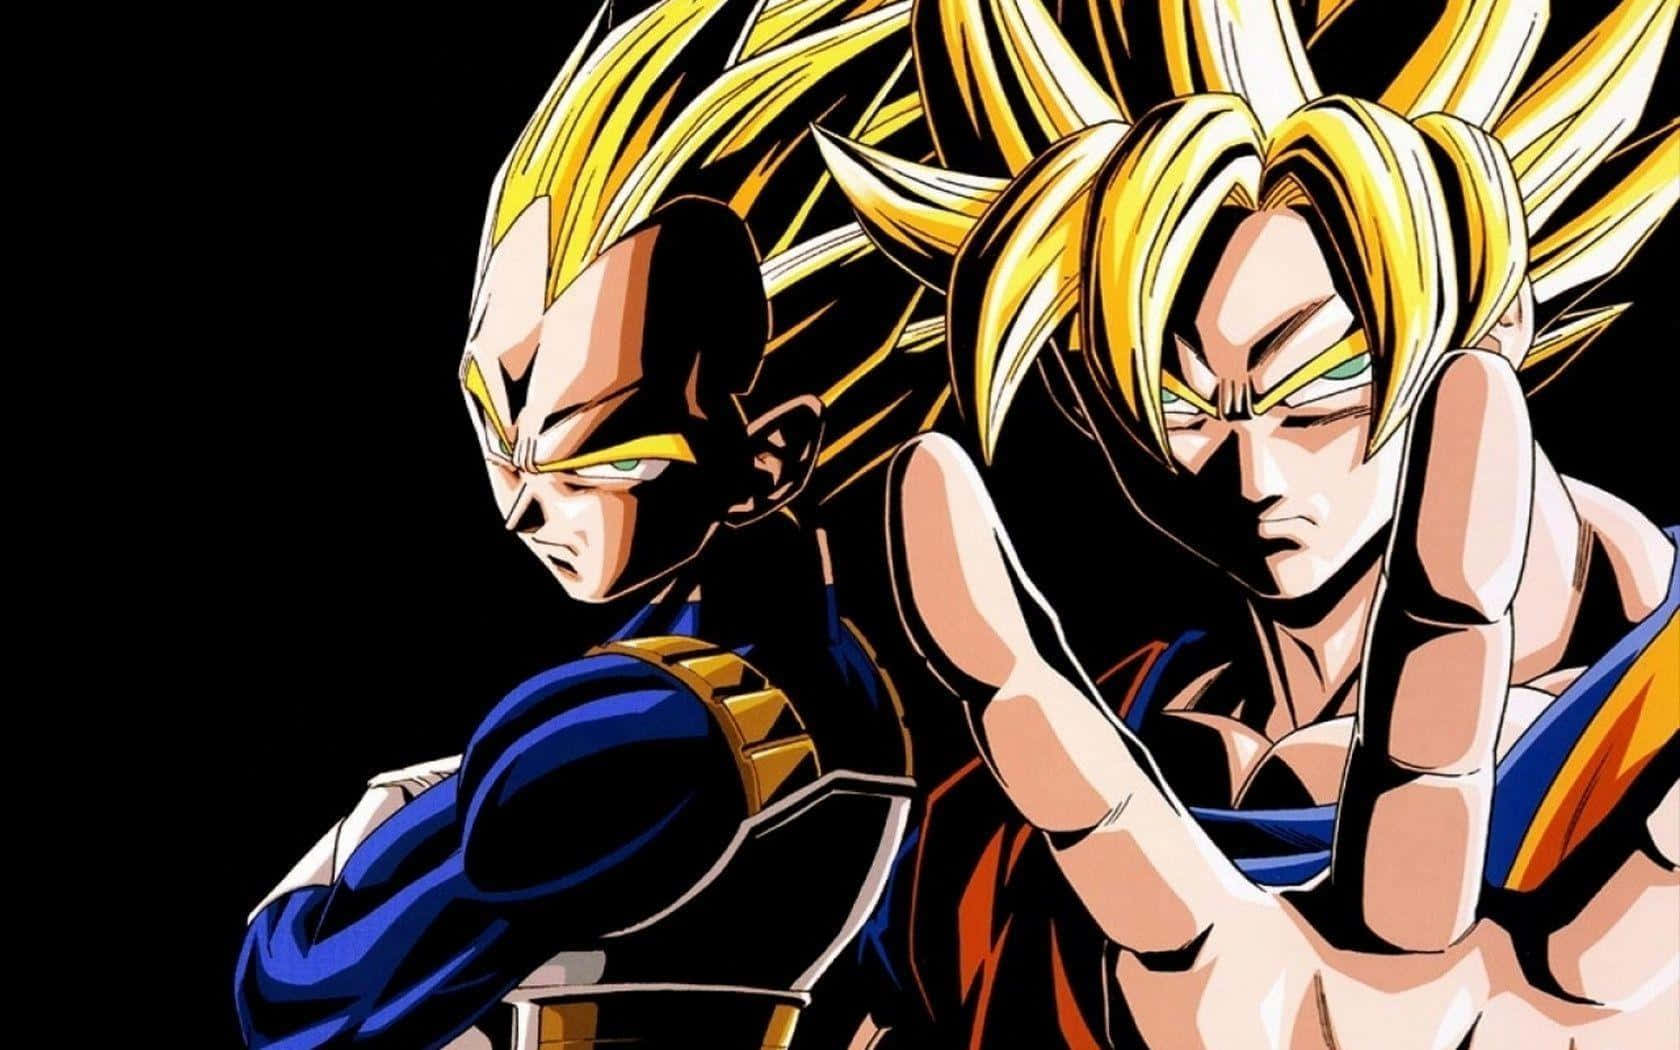 Dragon Ball Z's iconic characters blast off in an action-packed scene